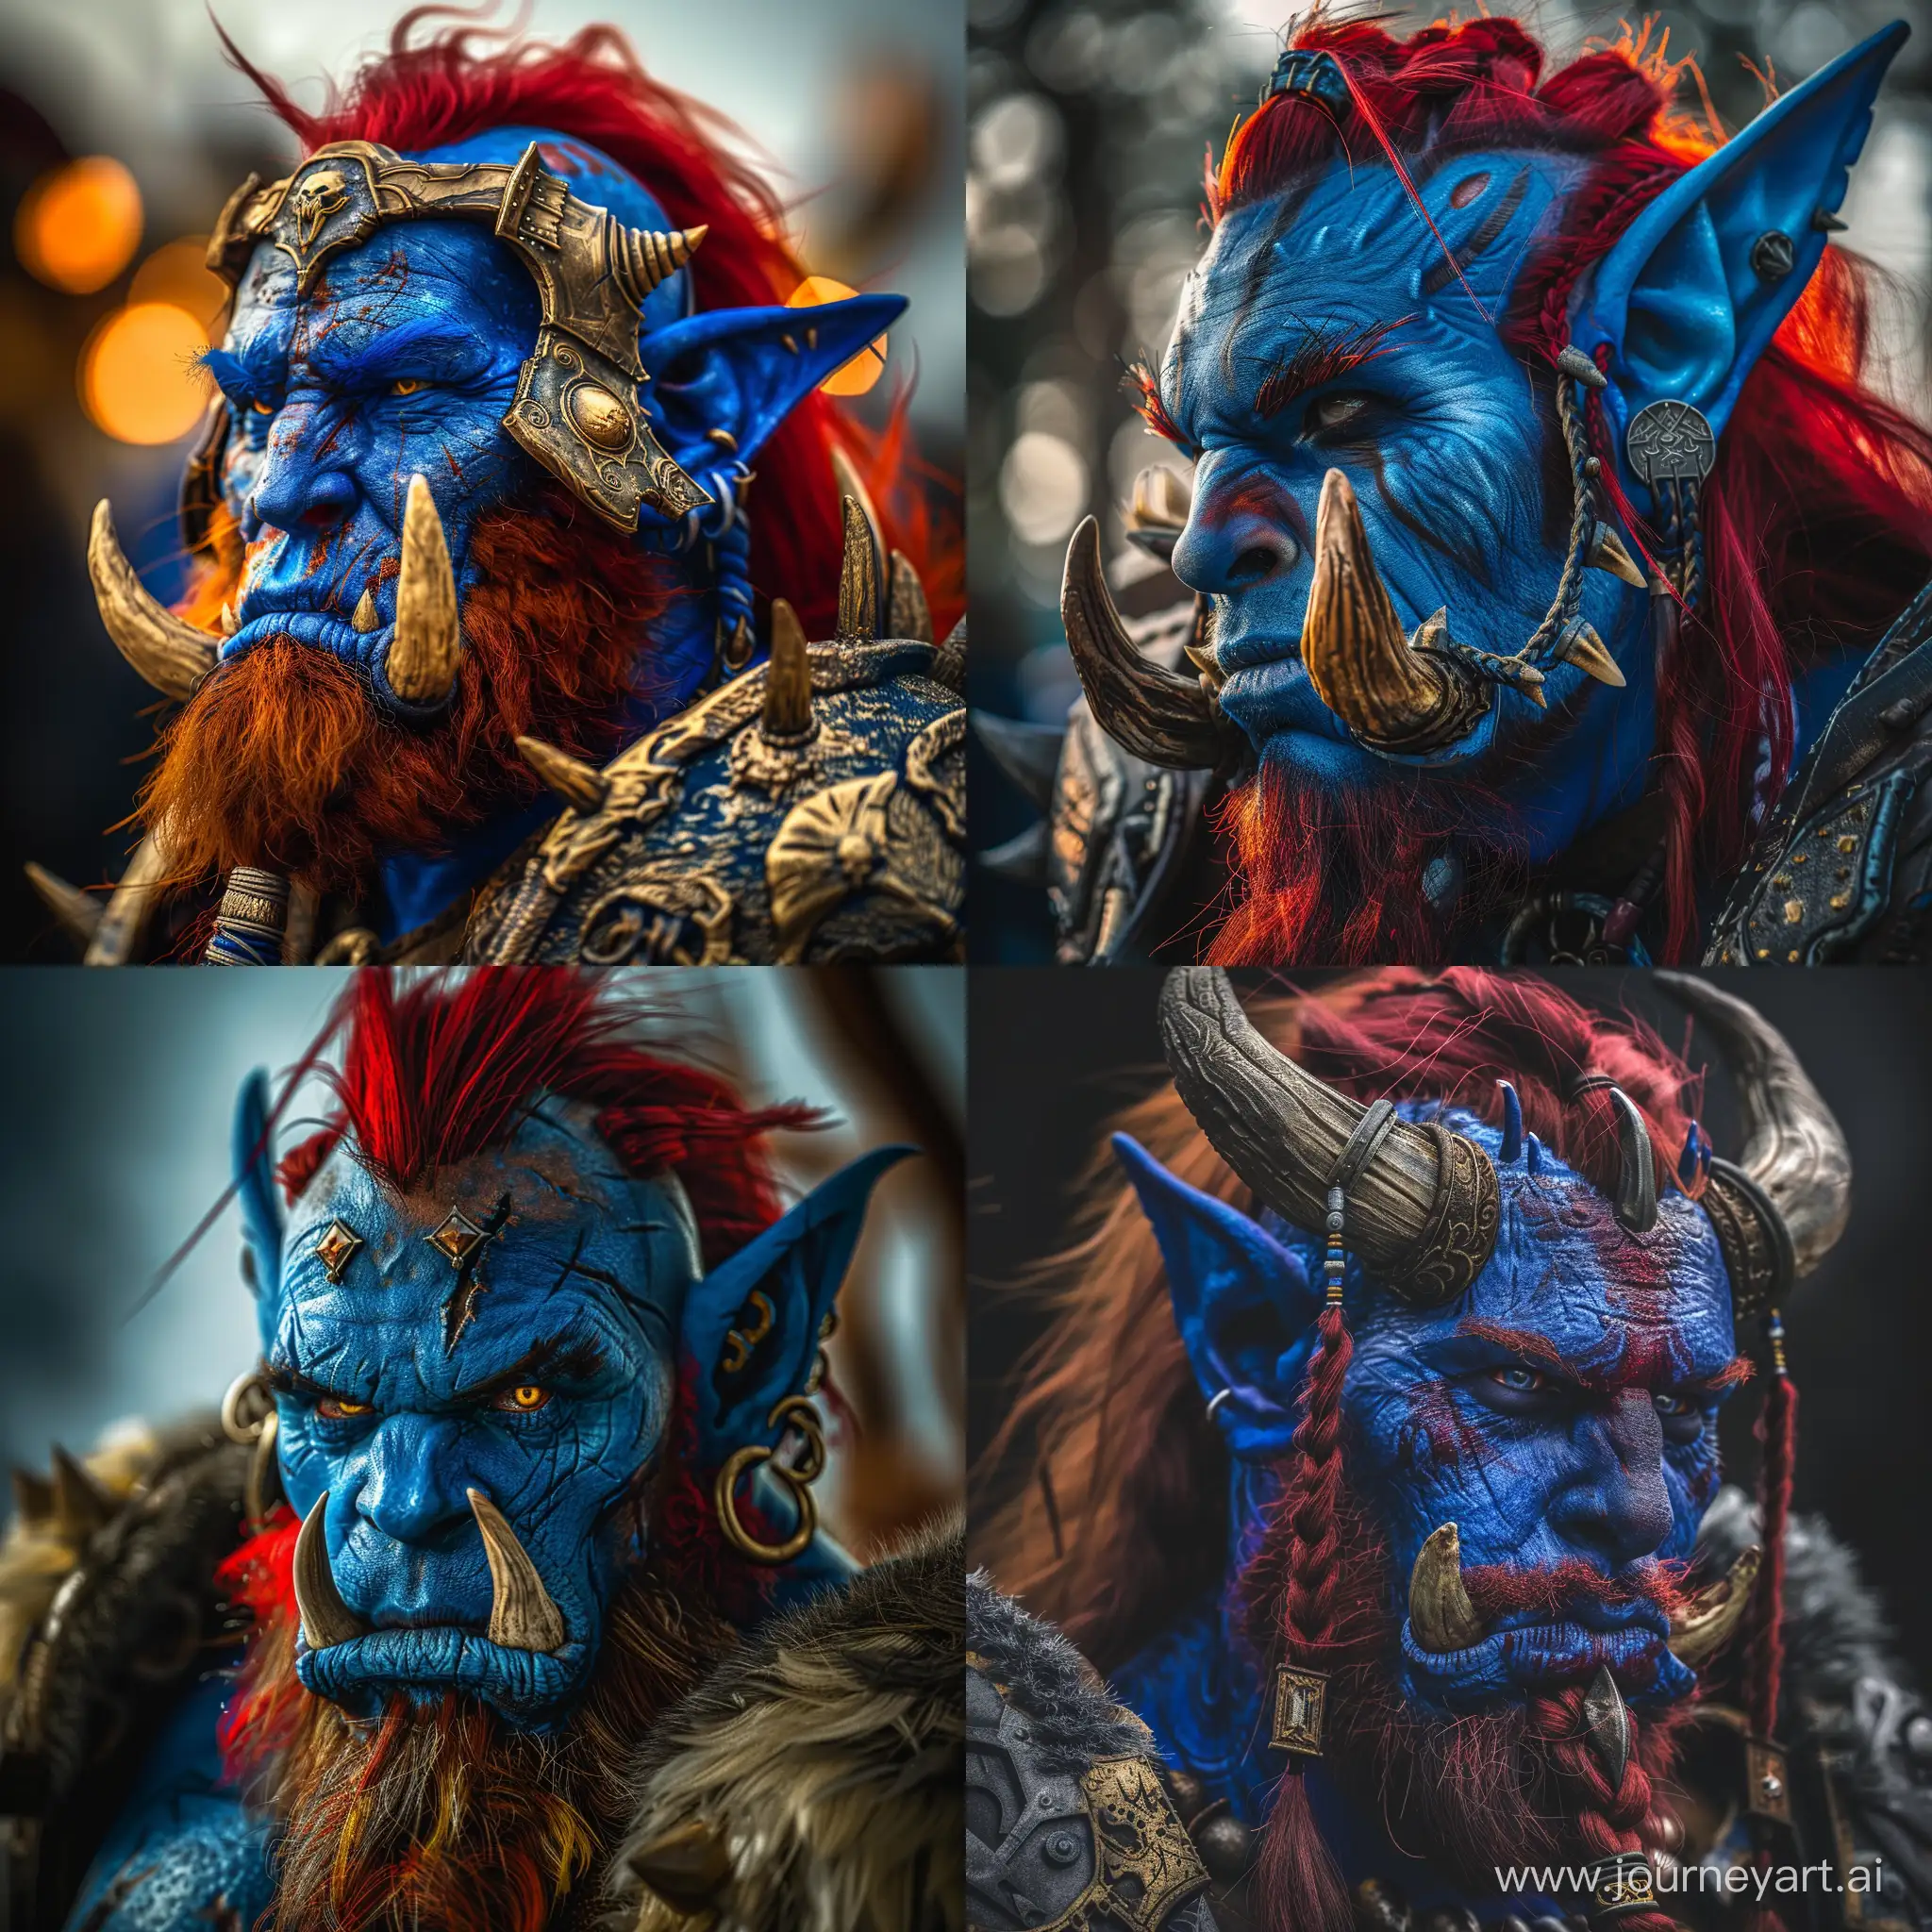 world of warcraft Vol'jin character, blue skin, red hair, tusks, ultra realistic, hyber detailed, modelcore, portrait photo. use sony a7 II camera with an 30mm lens fat F.1.2 aperture setting to blur the background and isolate the subject. use distinctive lighting on the subjects shot. The image should be shot in ultra-high resolution. --v 6